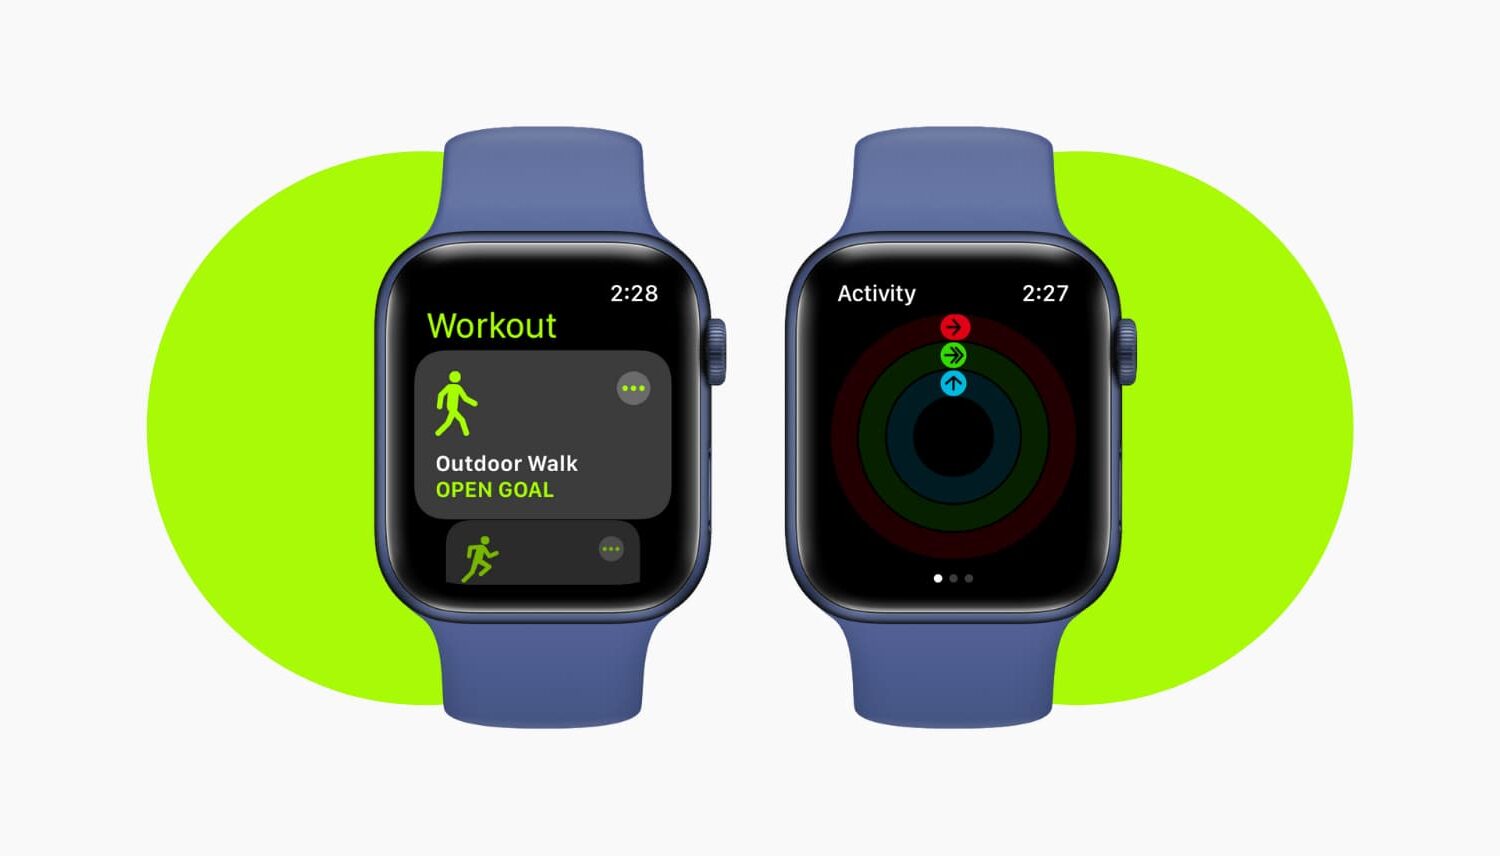 Apple Watch not registering workout and exercise correctly